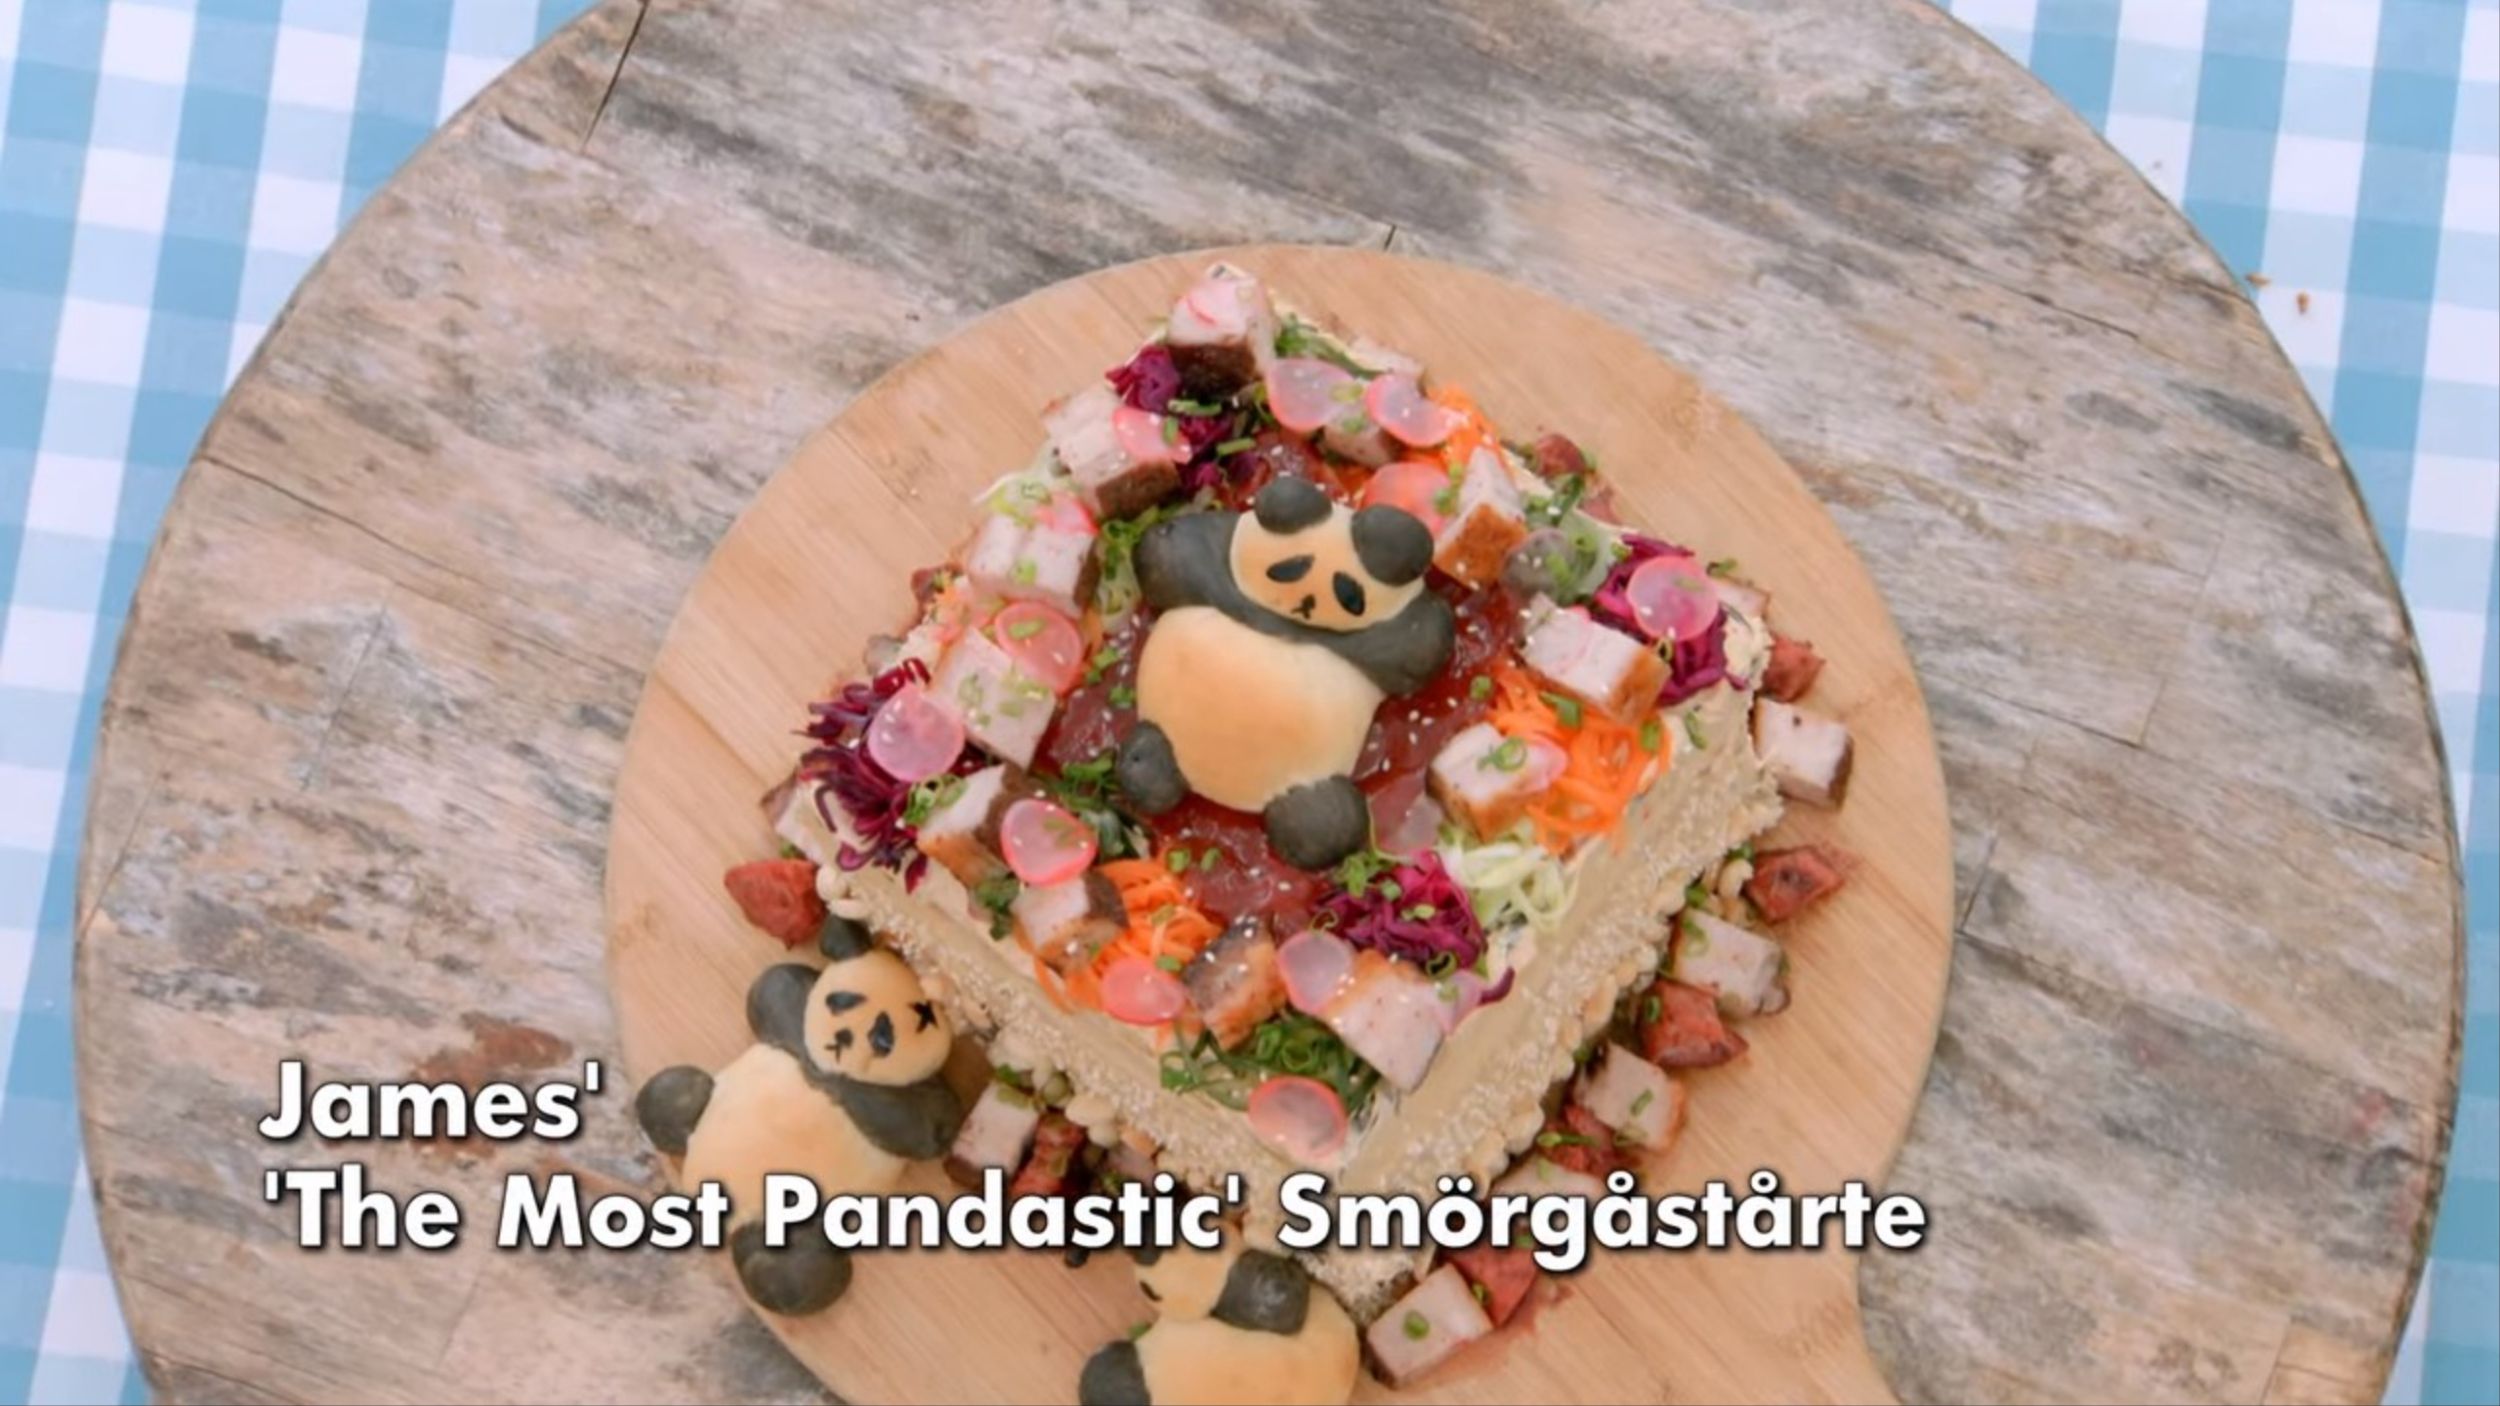 Picture Shows: James' The Most Pandastic Smörgåstårta Showstopper for The Great British Baking Show Season 10's Bread Week